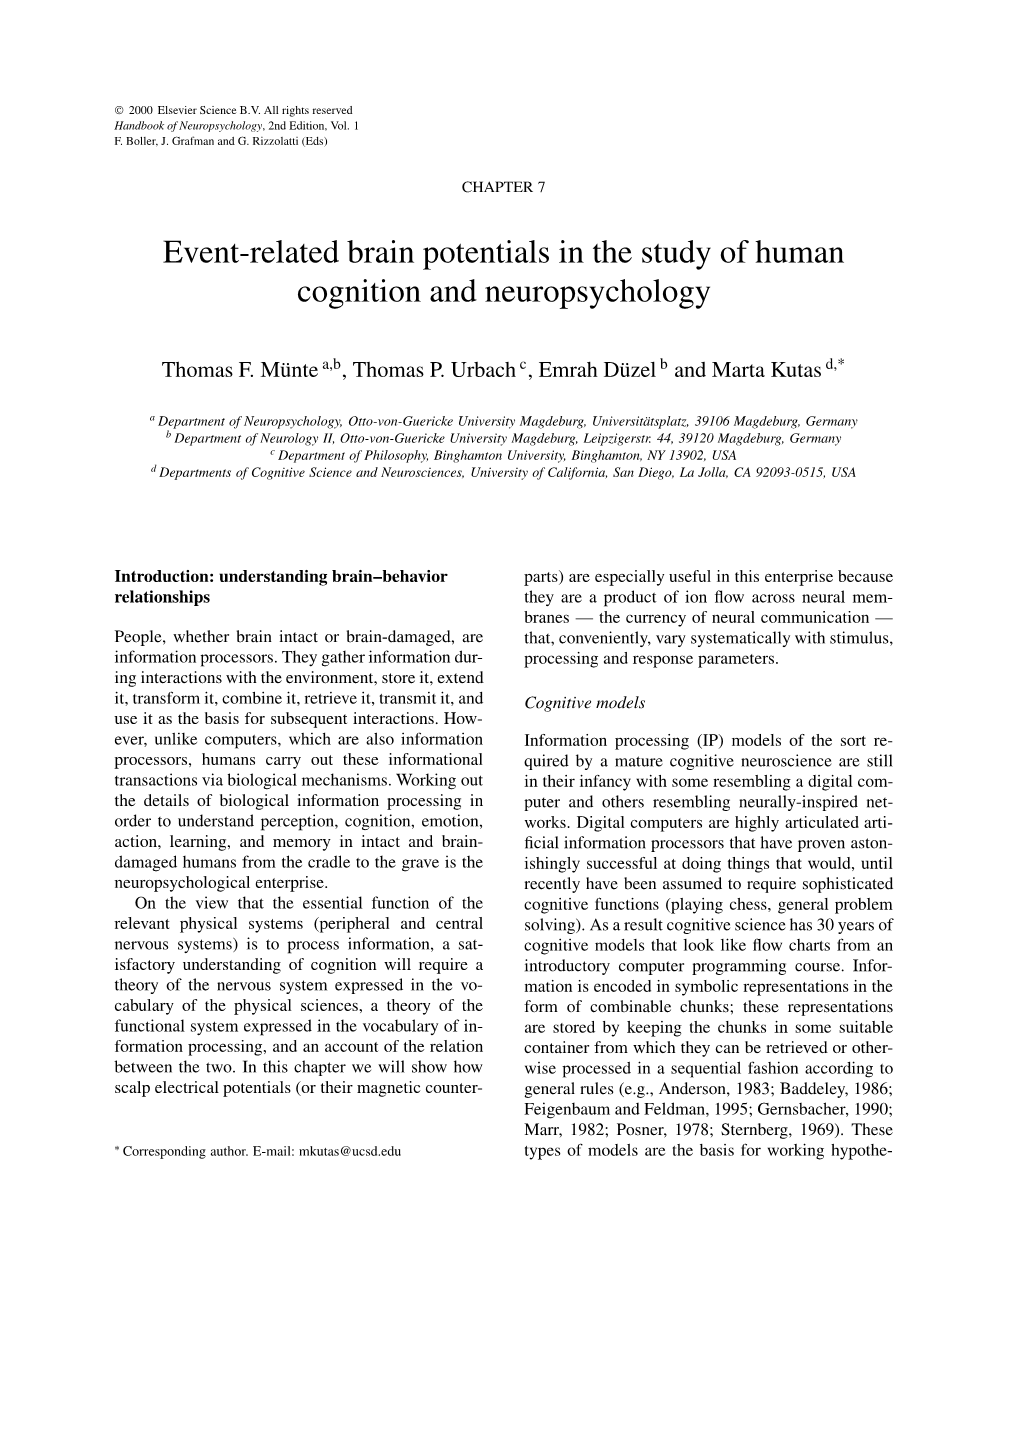 Event-Related Brain Potentials in the Study of Human Cognition and Neuropsychology